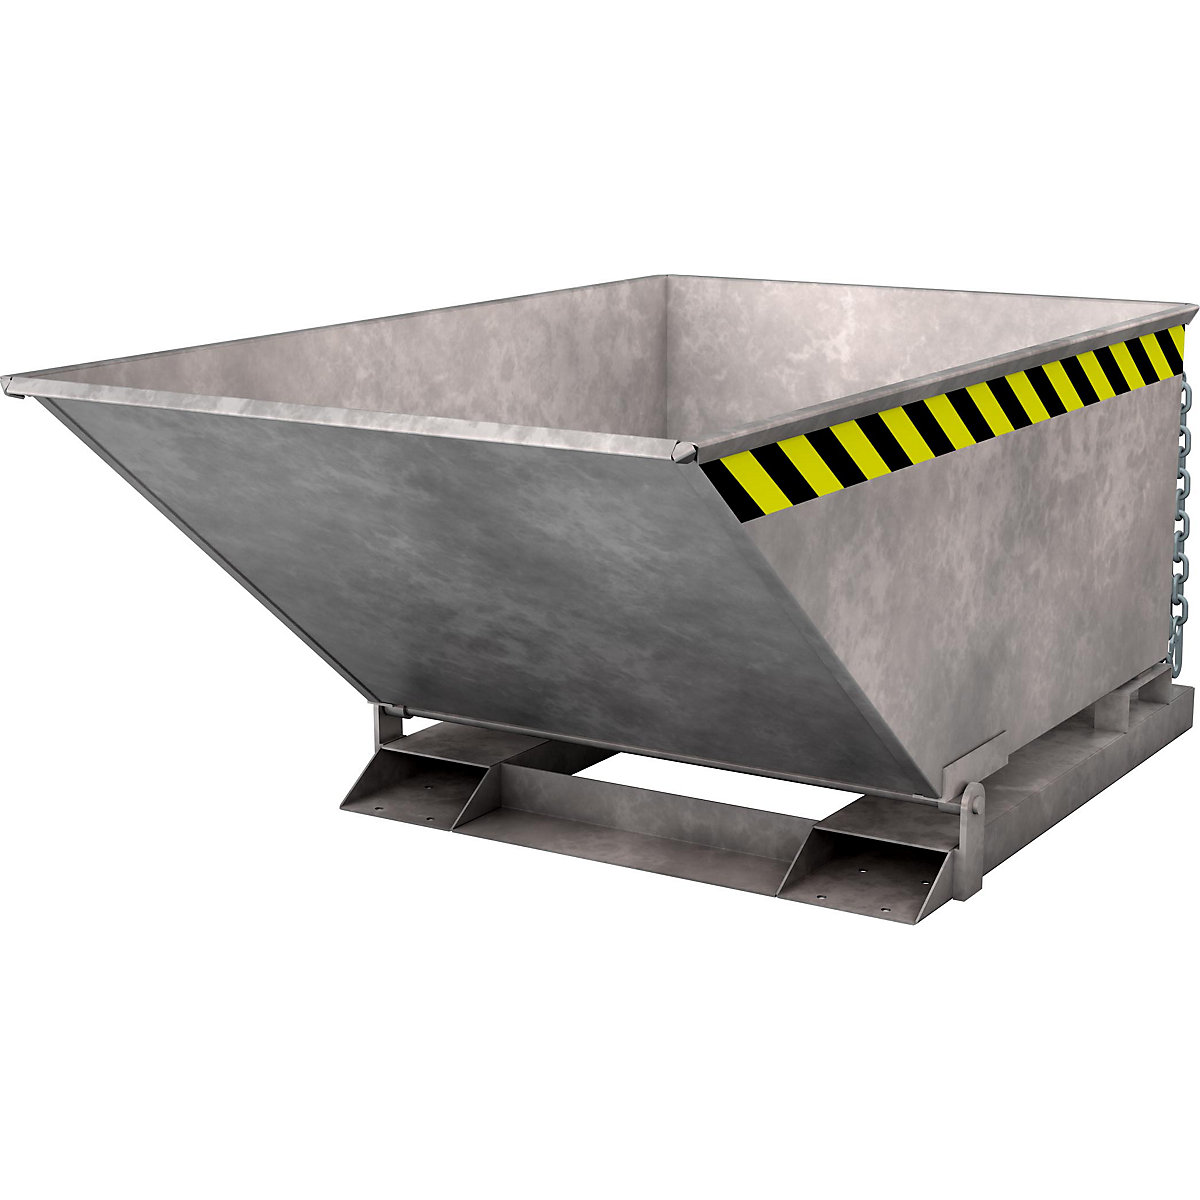 Tilting skip with tilting mechanism – eurokraft pro, low construction, capacity 0.4 m³, hot dip galvanised in accordance with EN ISO 1461-4